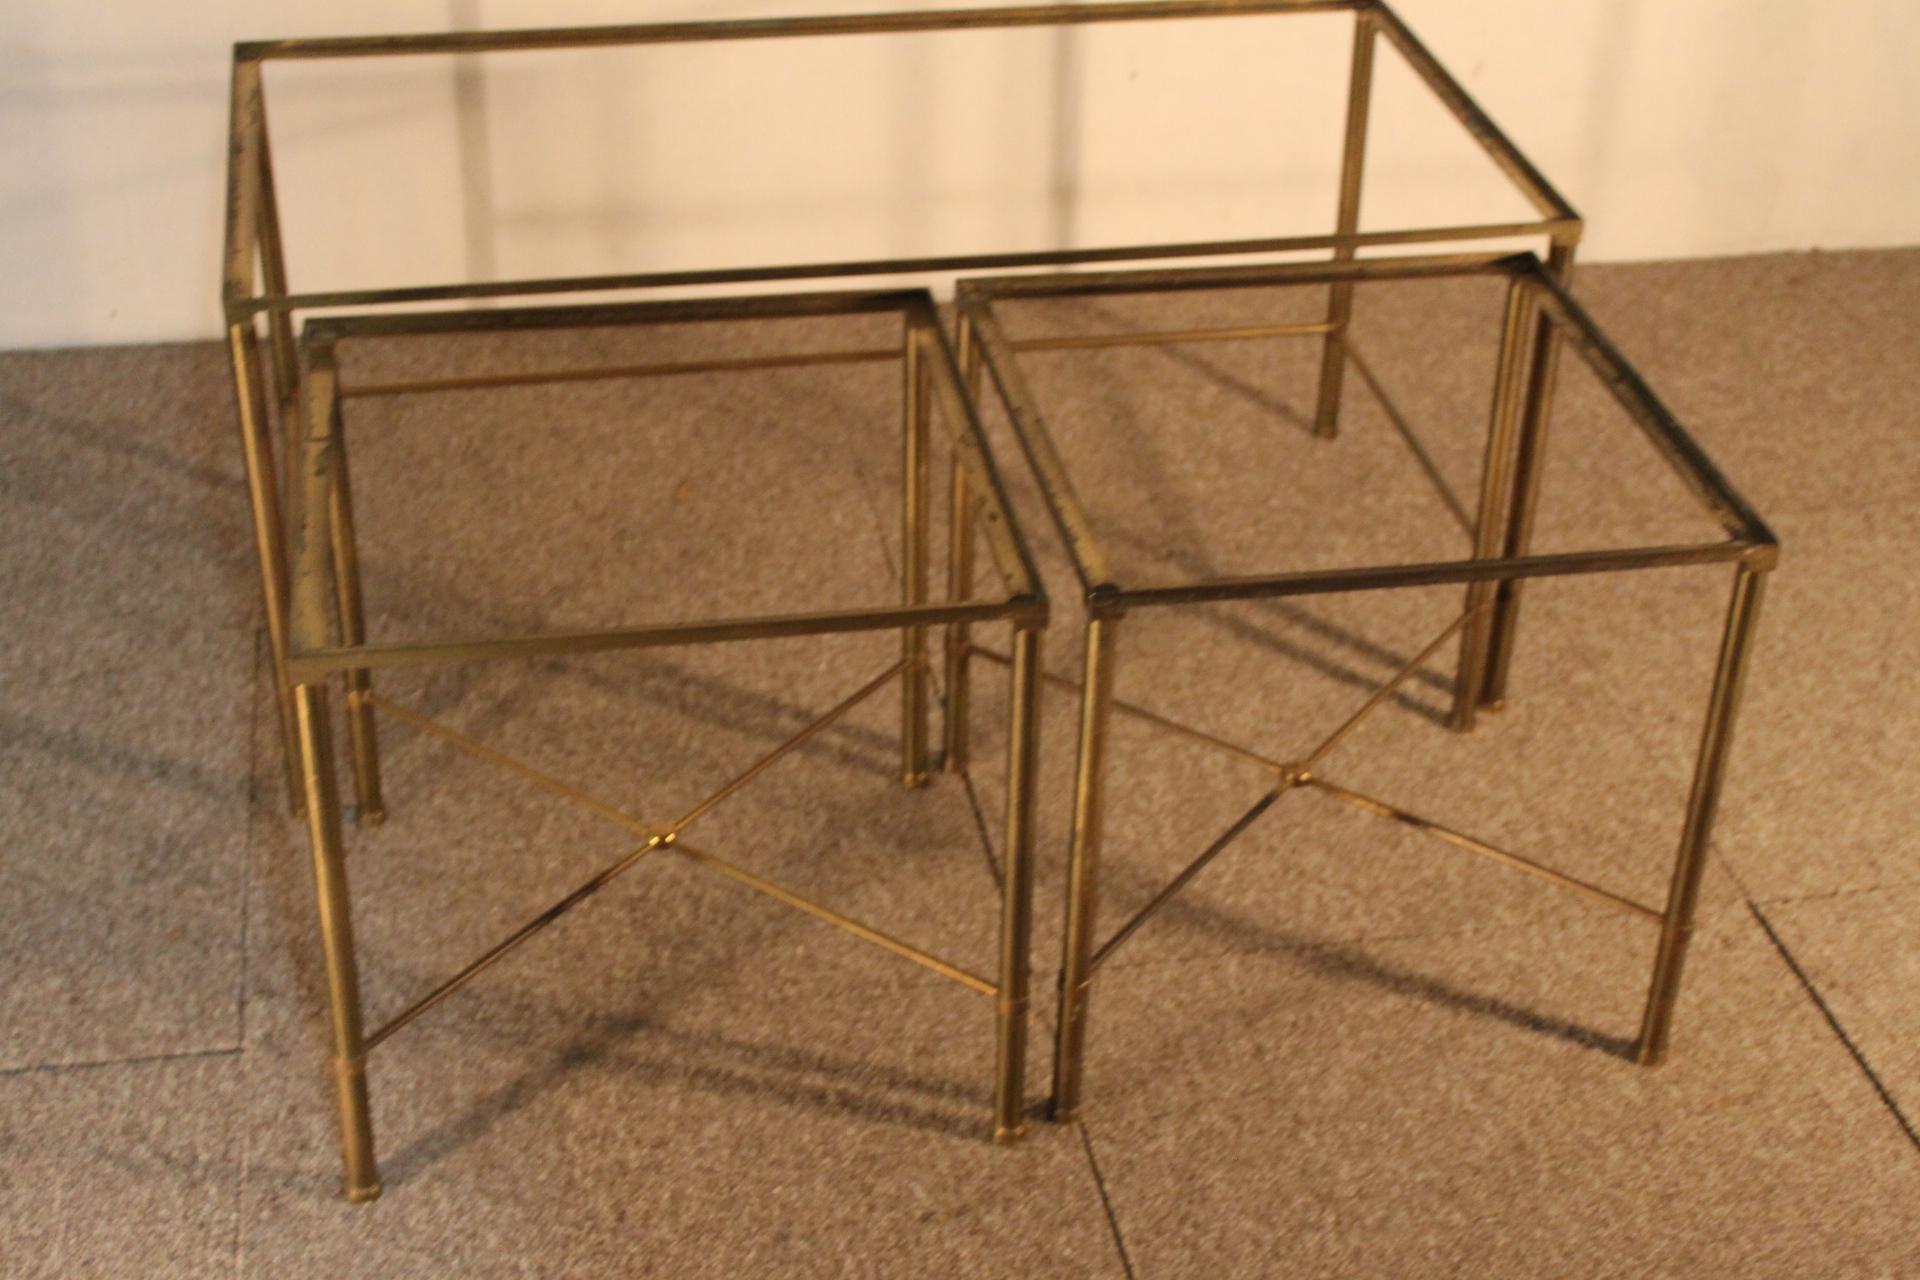 Series of three built-in tables, brass structure with glass top, silver edges.
Pair of small tables with braced legs, (40/40X38.5 cm)
Italian work from the 1970s.